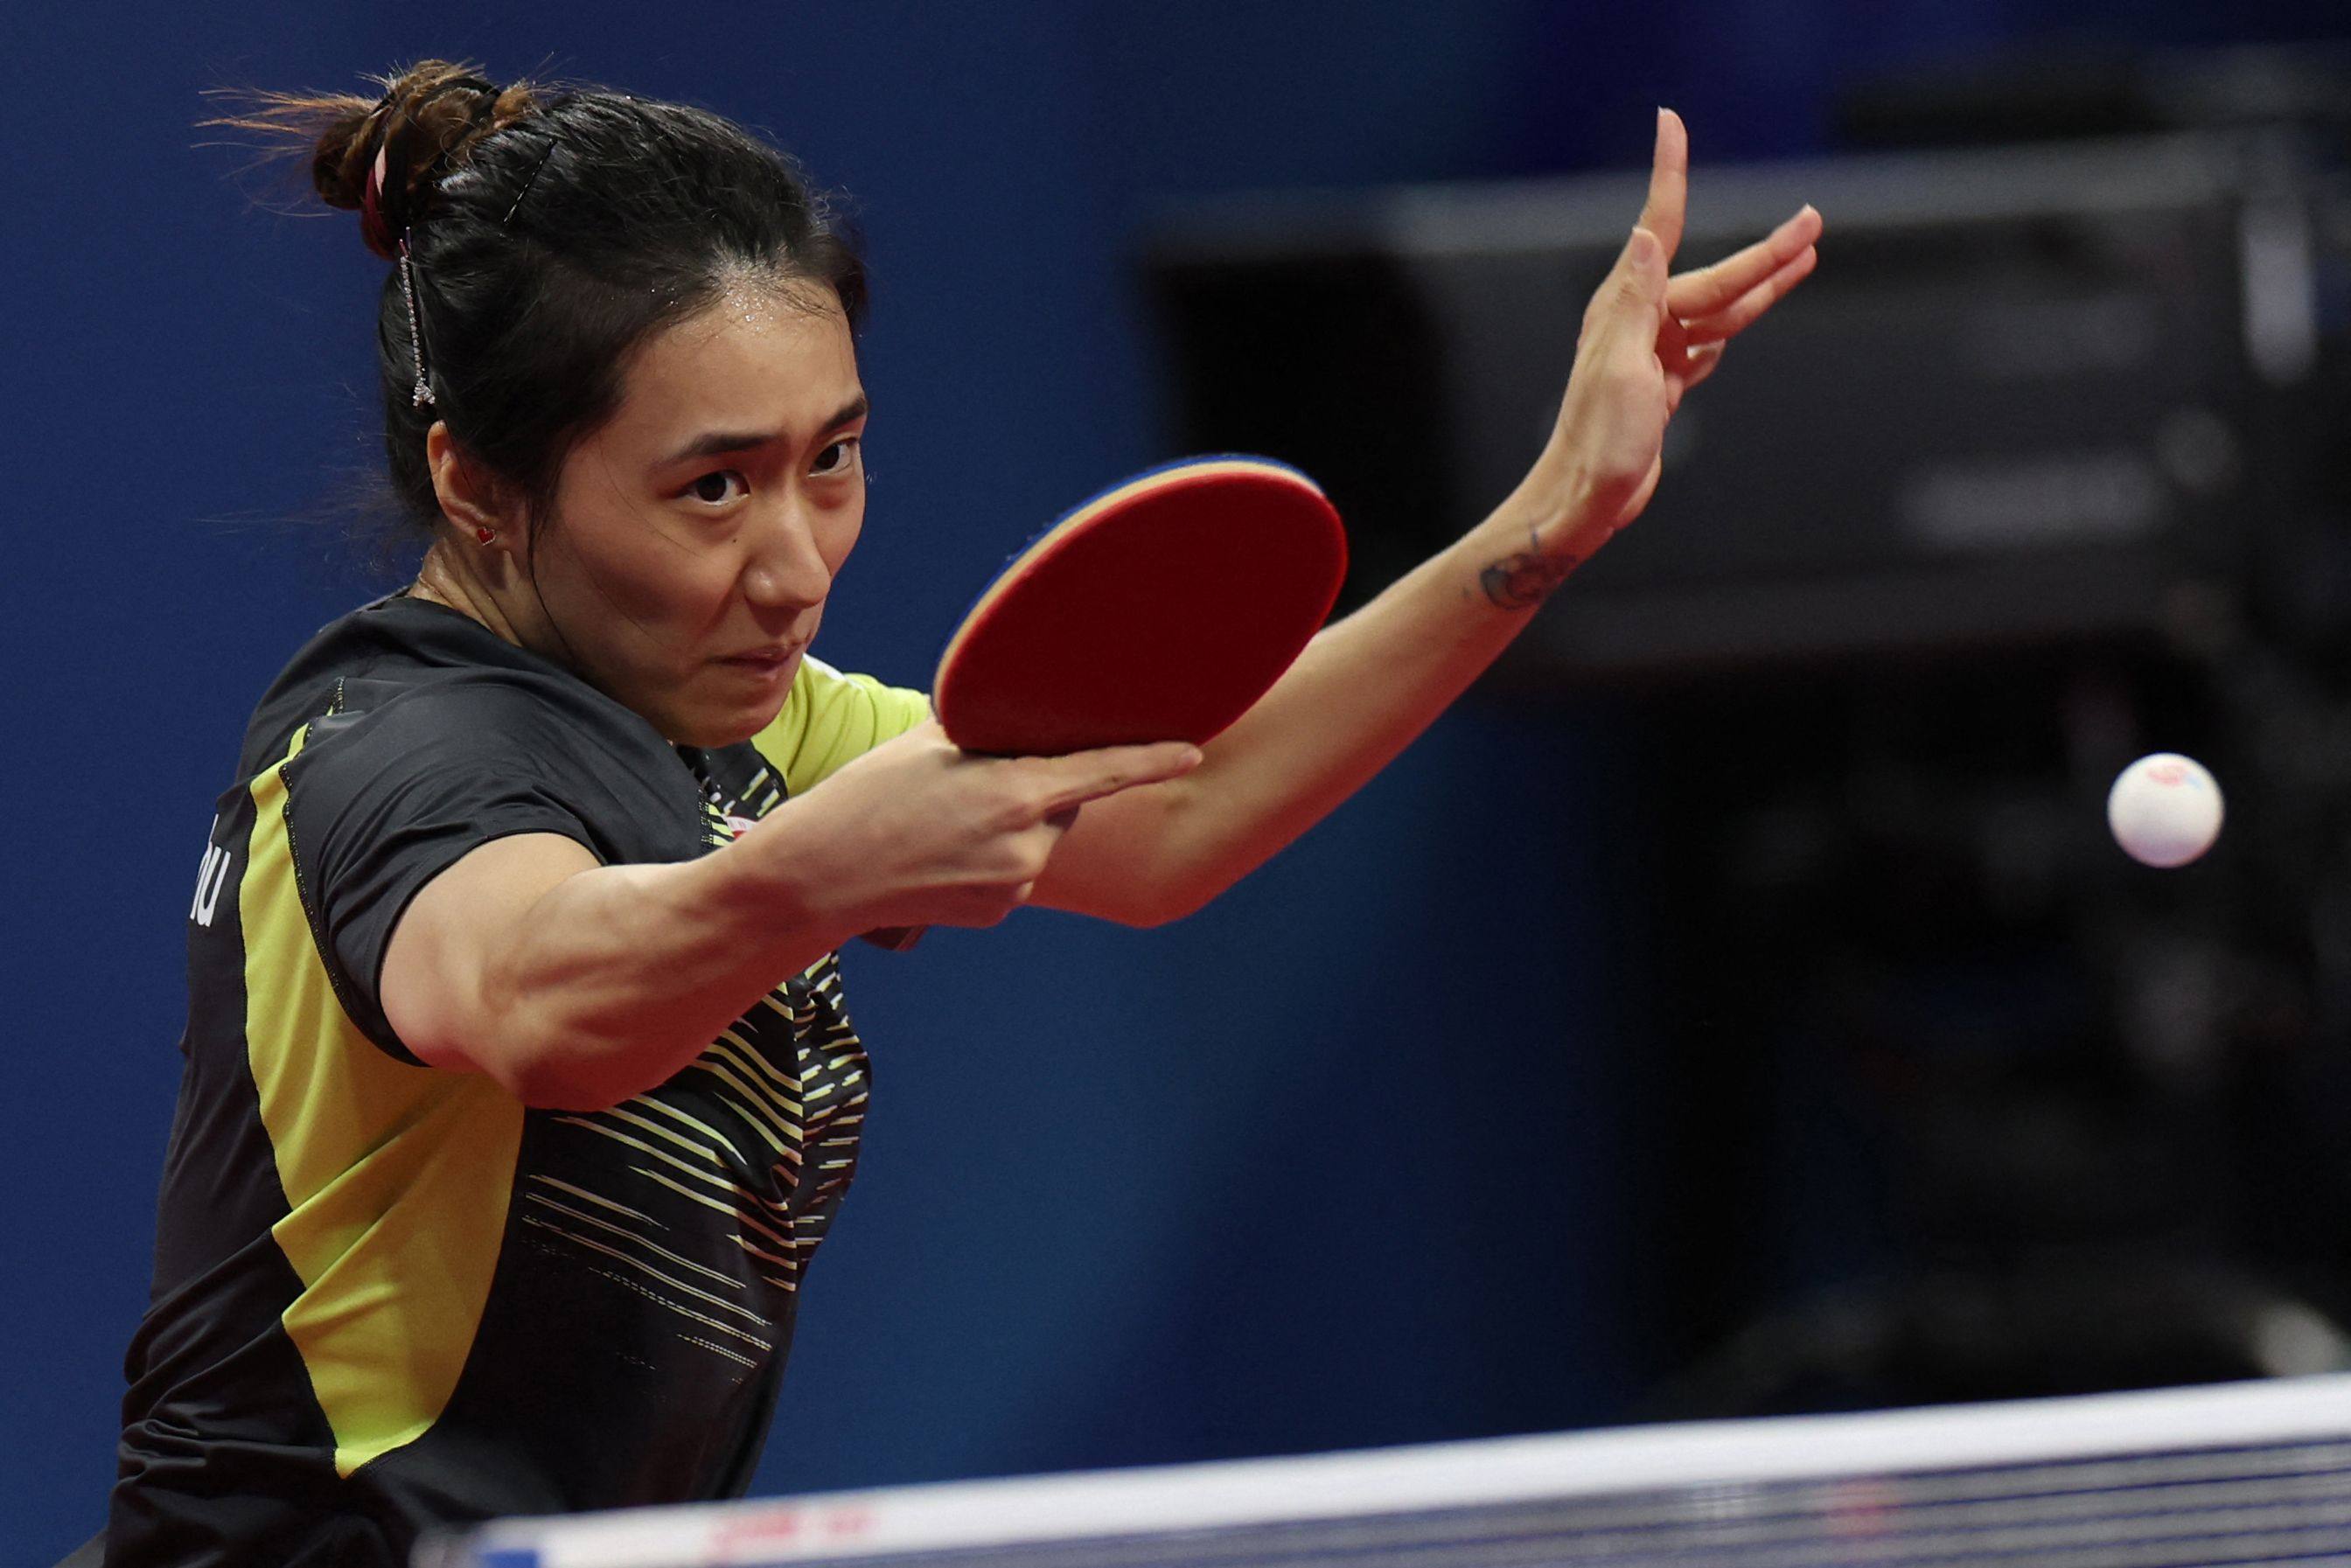 Hong Kong’s Zhu Chengzhu on her way to victory over Giorgia Piccolin of Italy in Chengdu. Photo: AFP